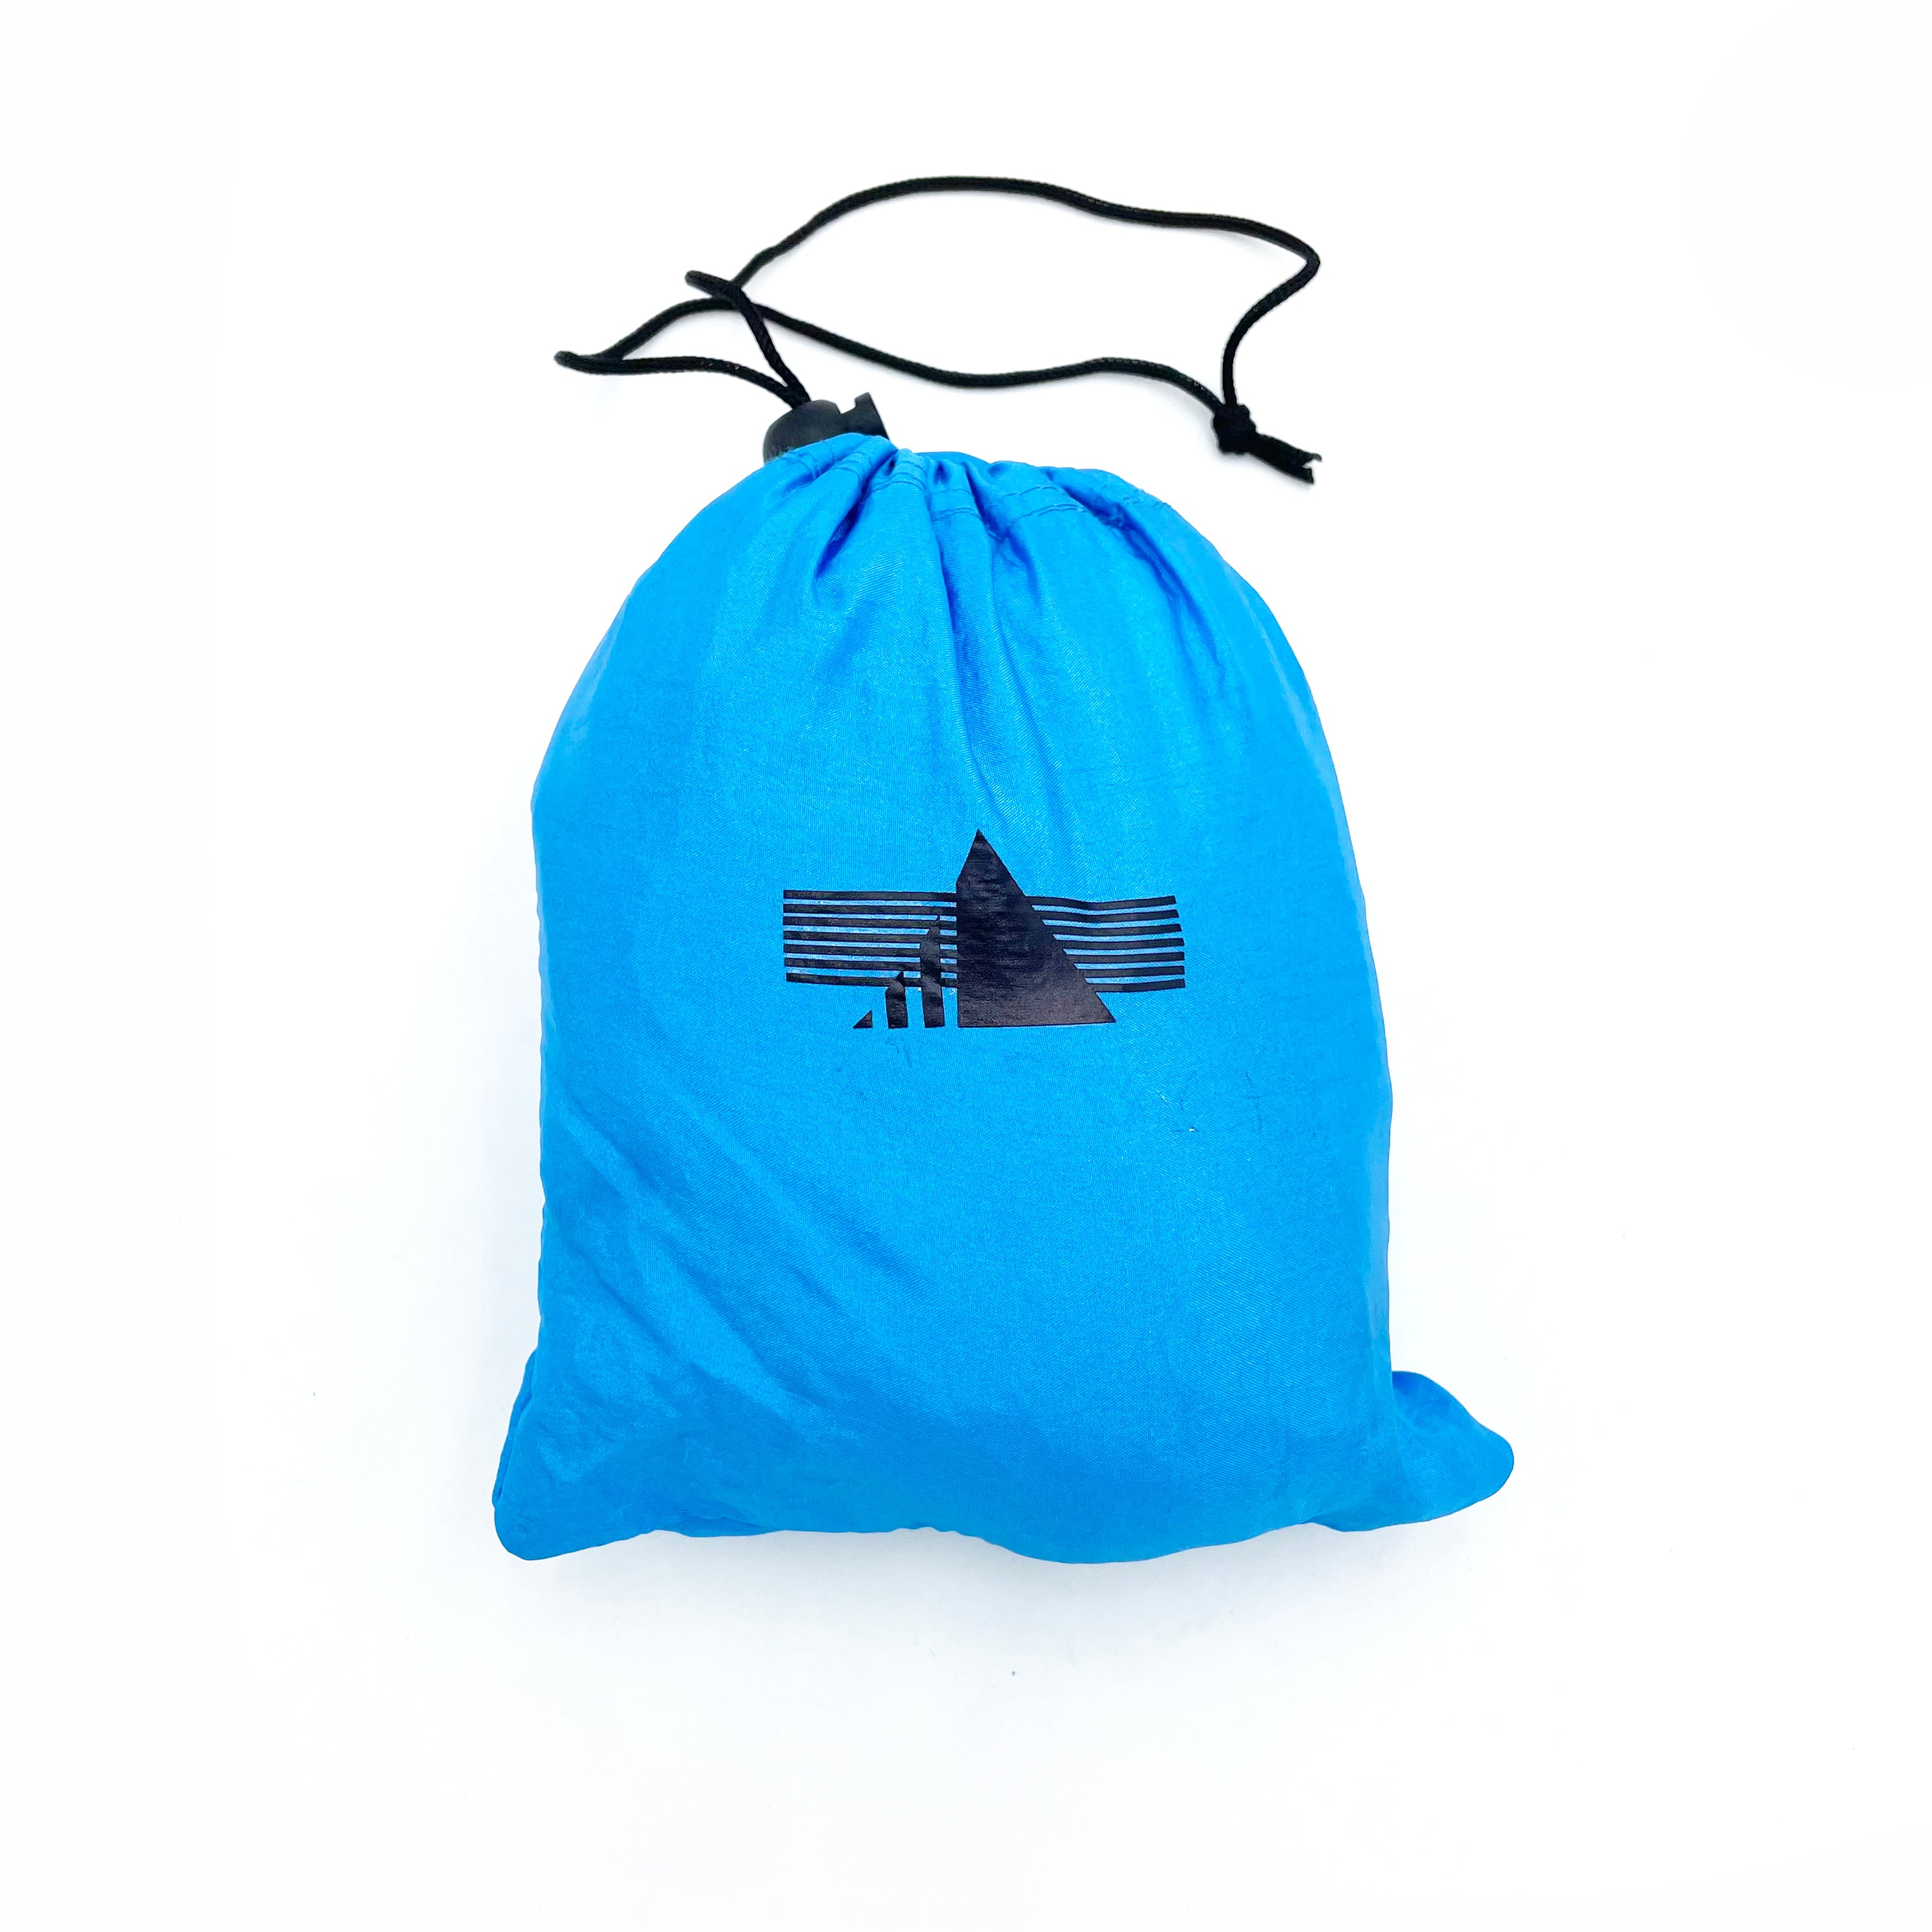 Nylon Folding Camping Hammock with Attached Stuff Sack